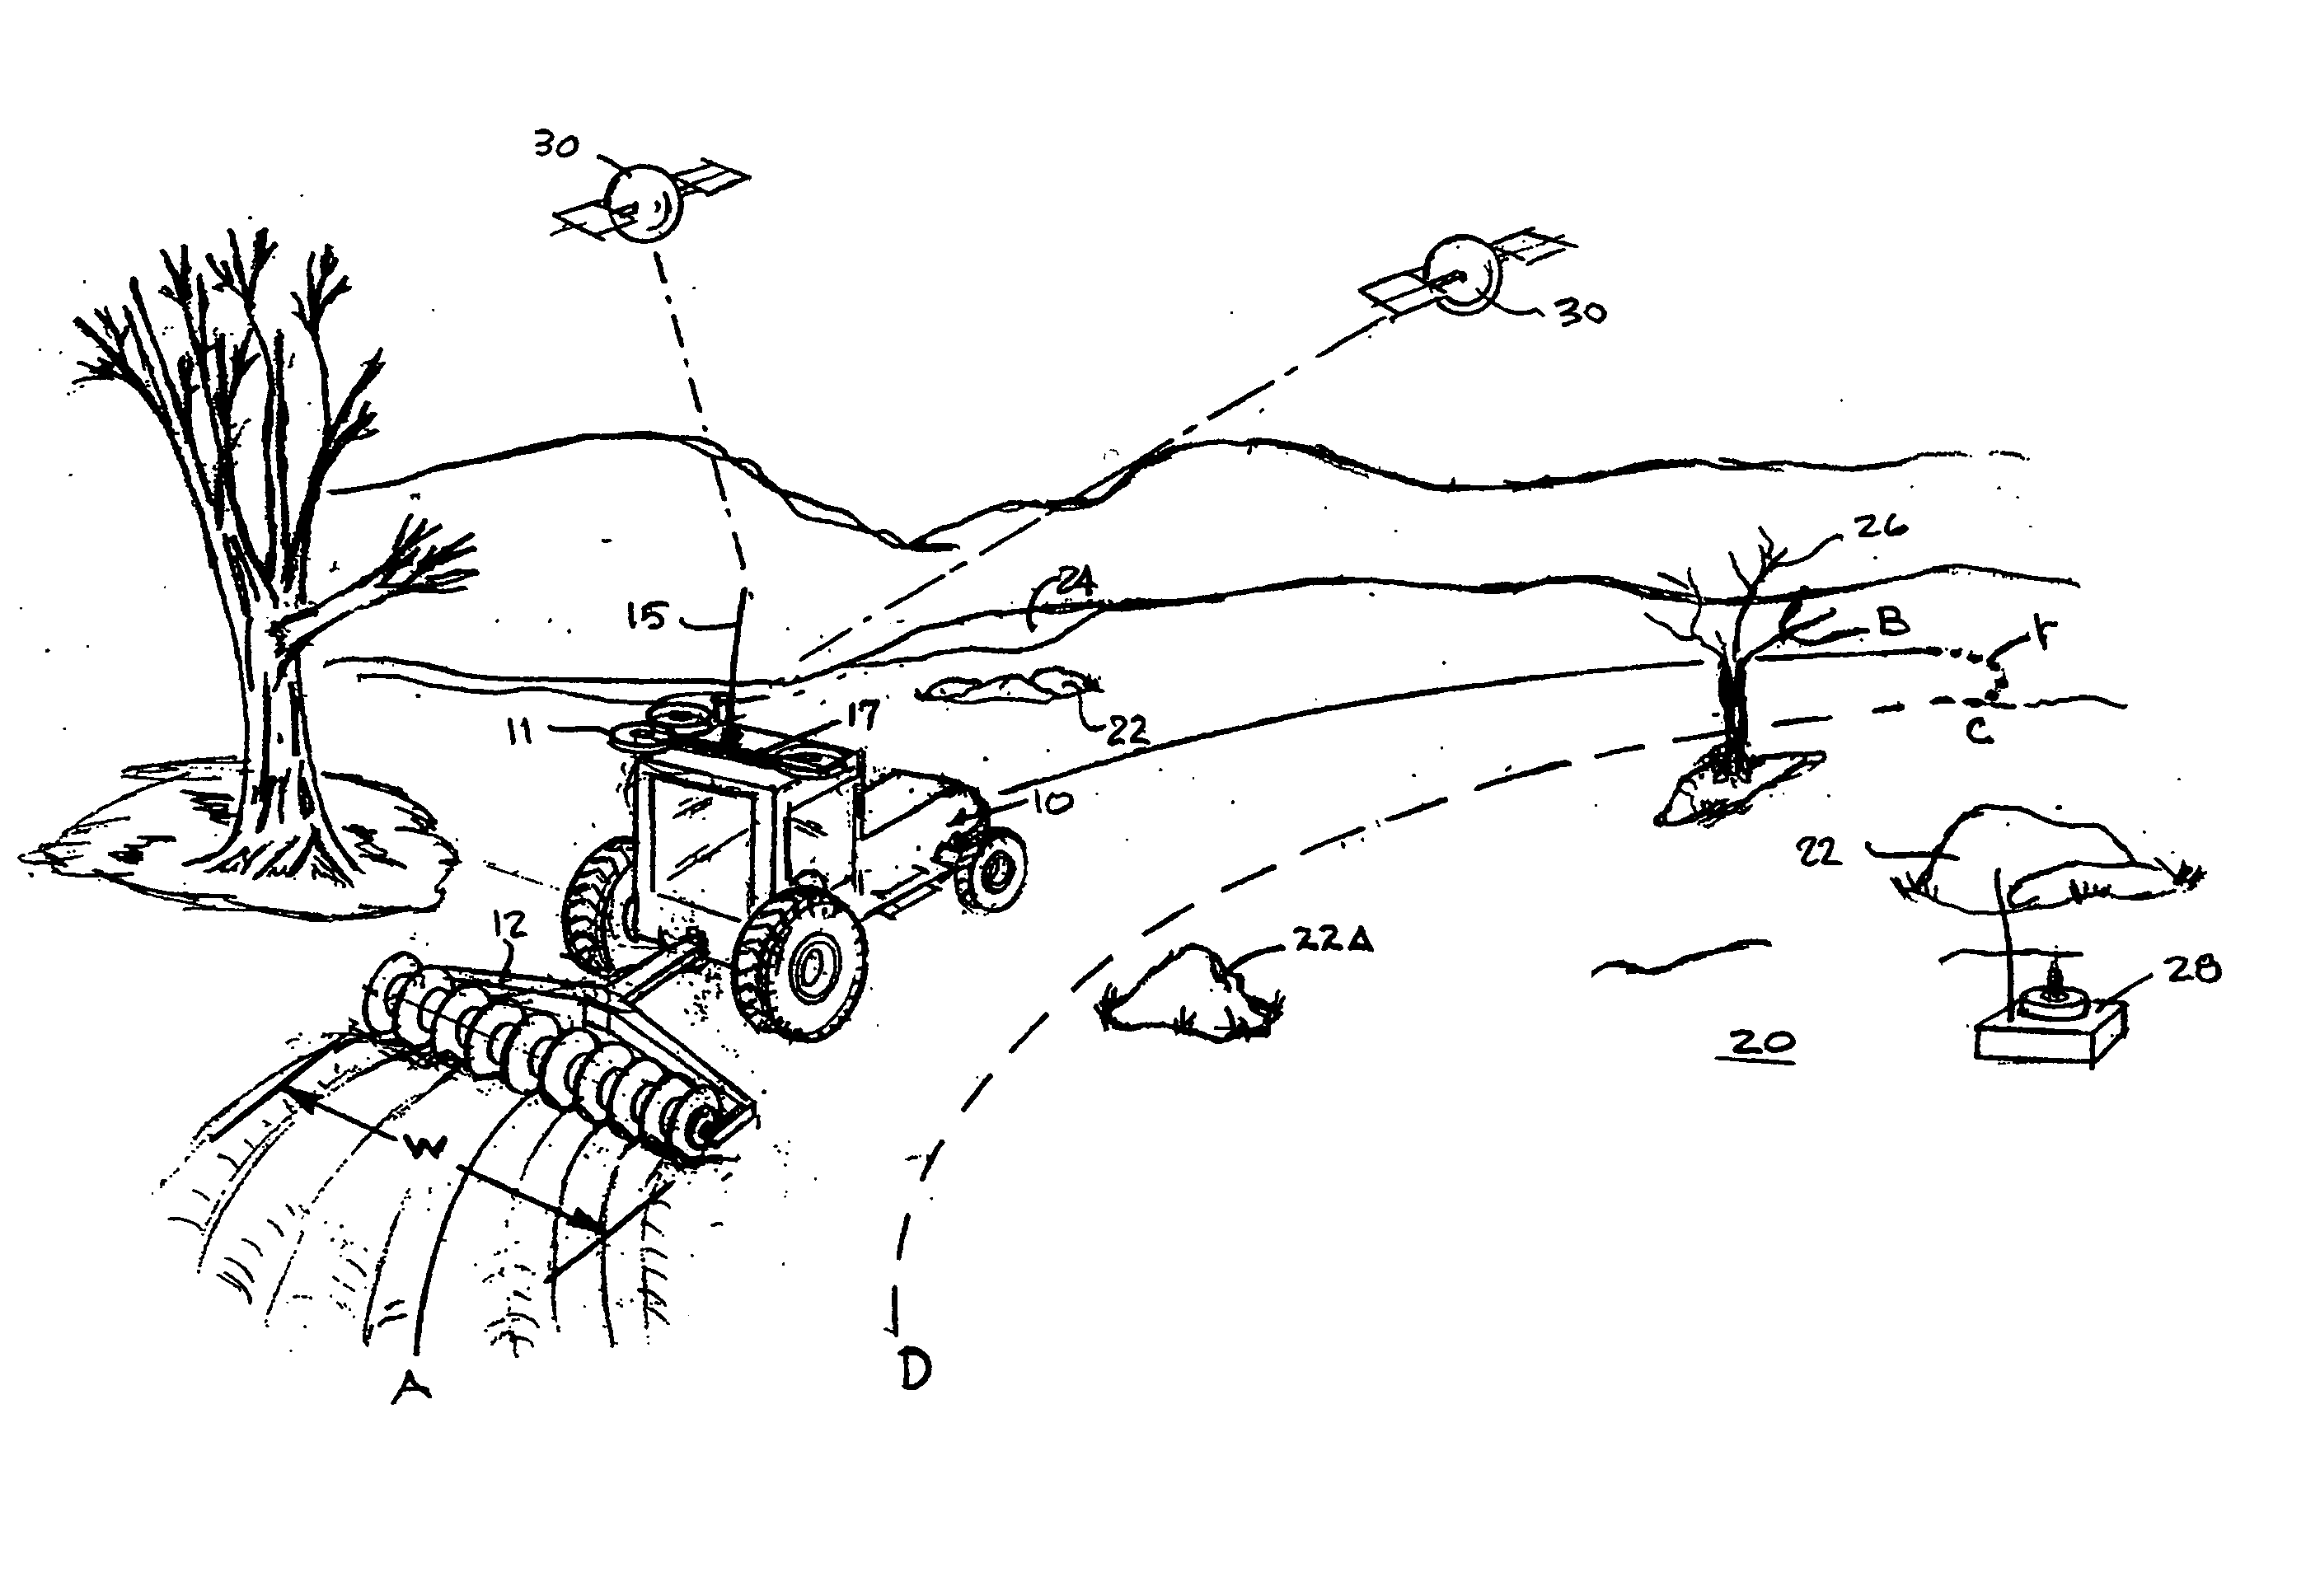 System and method for propagating agricultural vehicle guidance paths that have varying curvature along their length